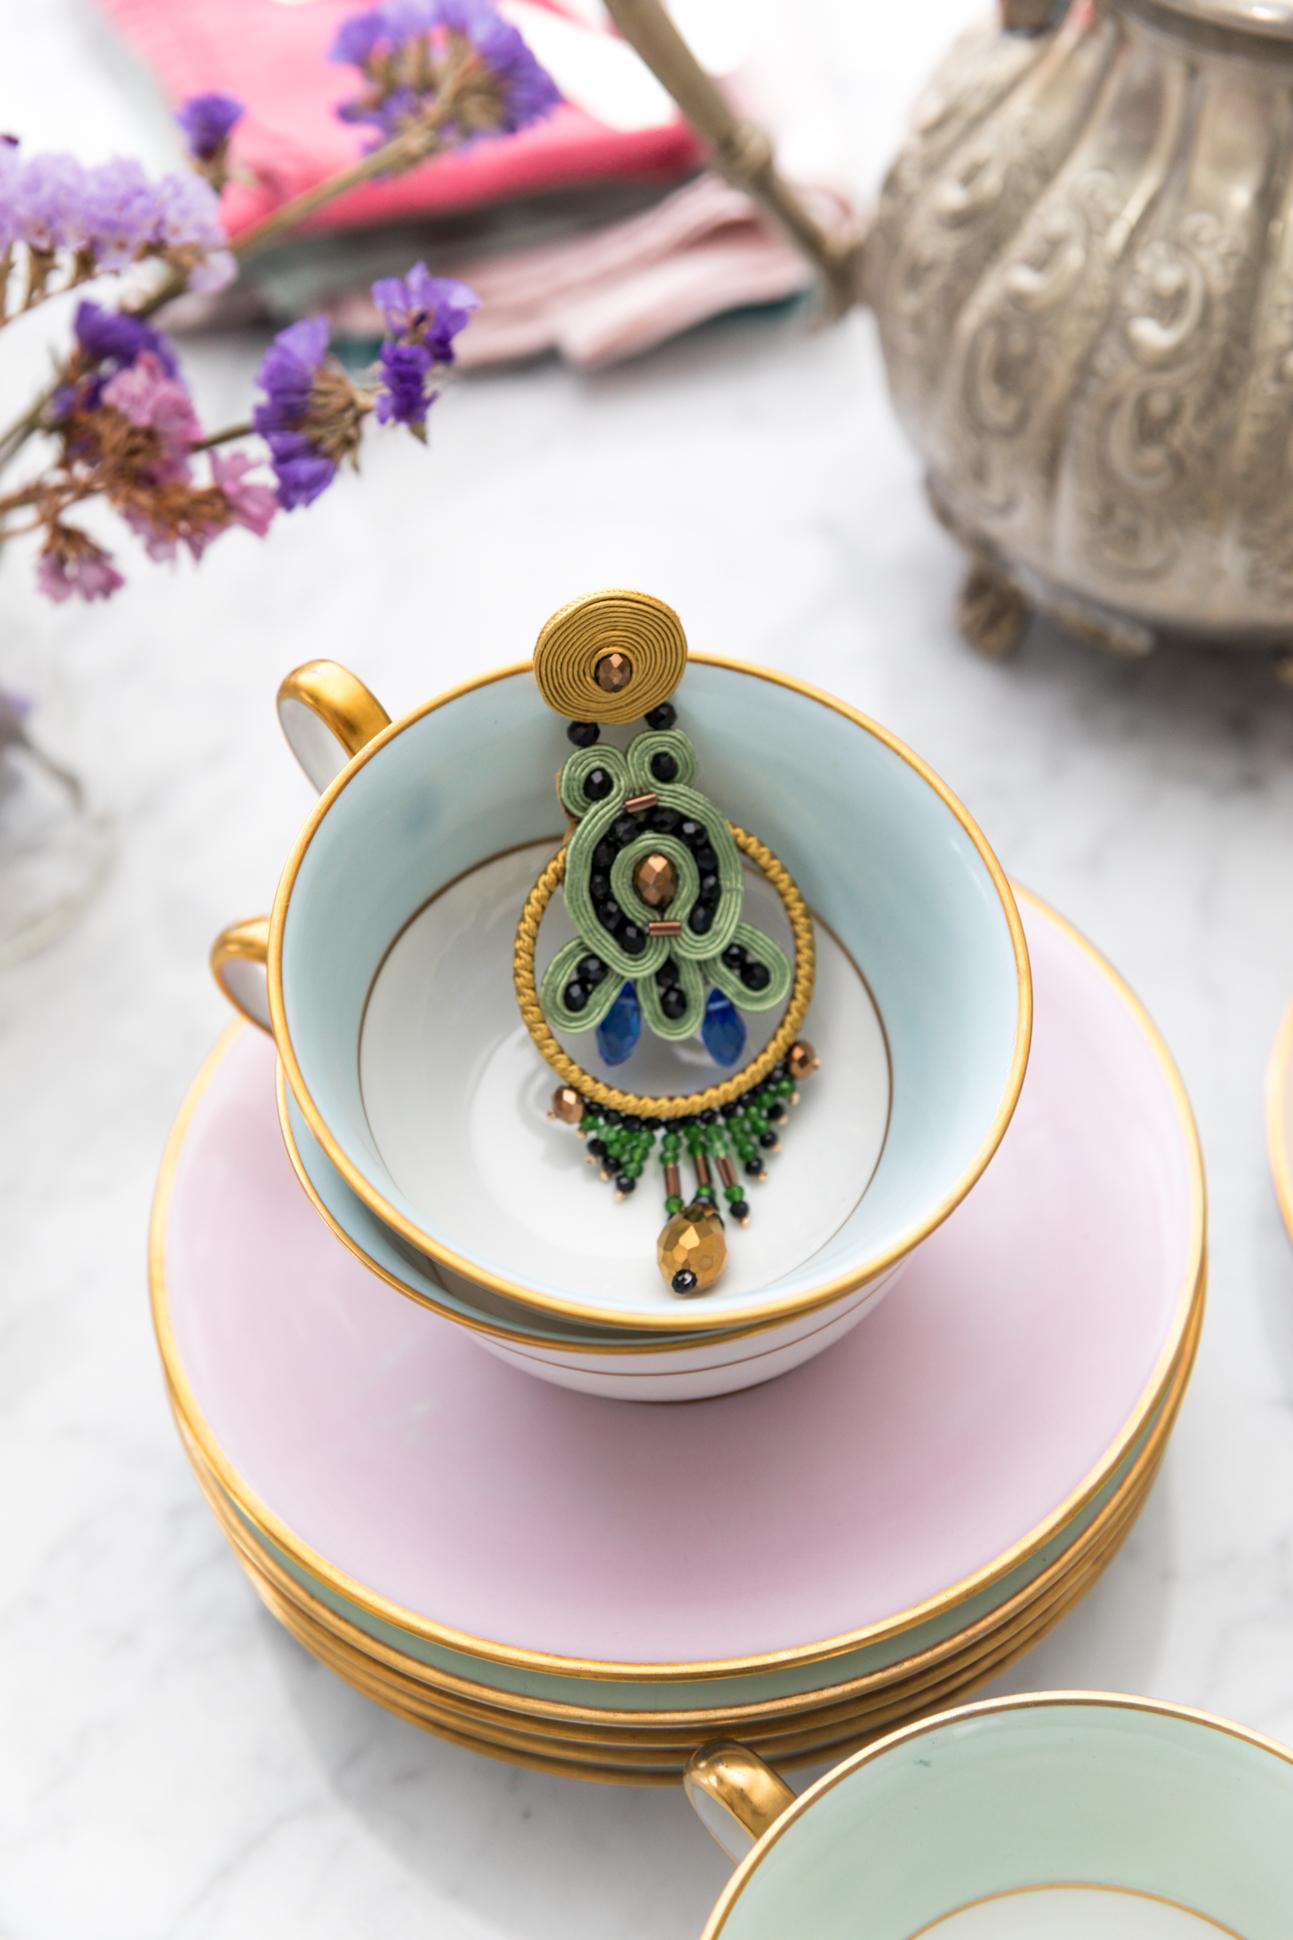 Musula La Patisserie Saint-Honoré Pistache Earrings
La Patisserie Collection is a special homage to sweet lovers
Musula in the Fall collection 2021 wants  to pay tribute to the sweet and delicate Pastry world. Pastries have been always a must at our